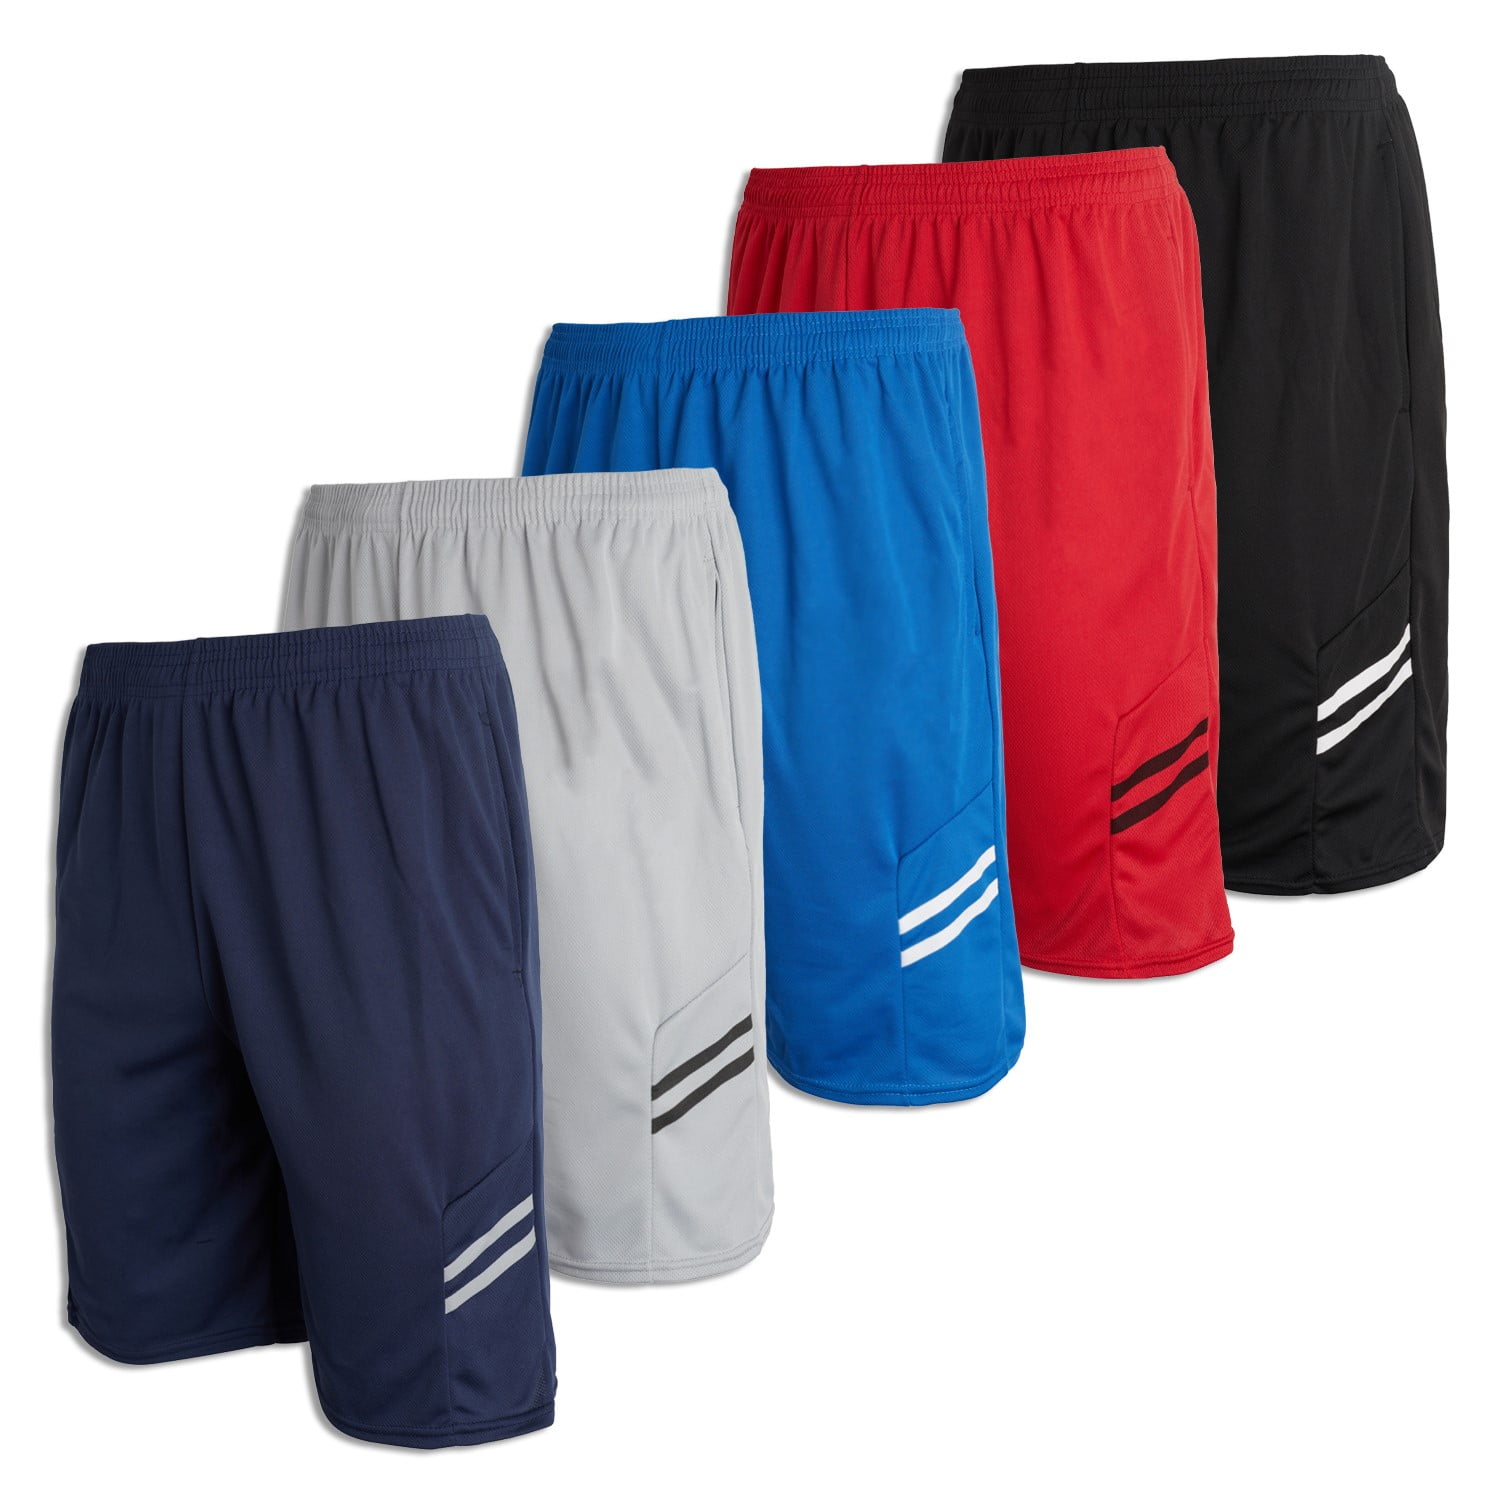 5 Pack Men's 9 Mesh Performance Dry-Fit Athletic Tricot Workout Gym Shorts with Pockets